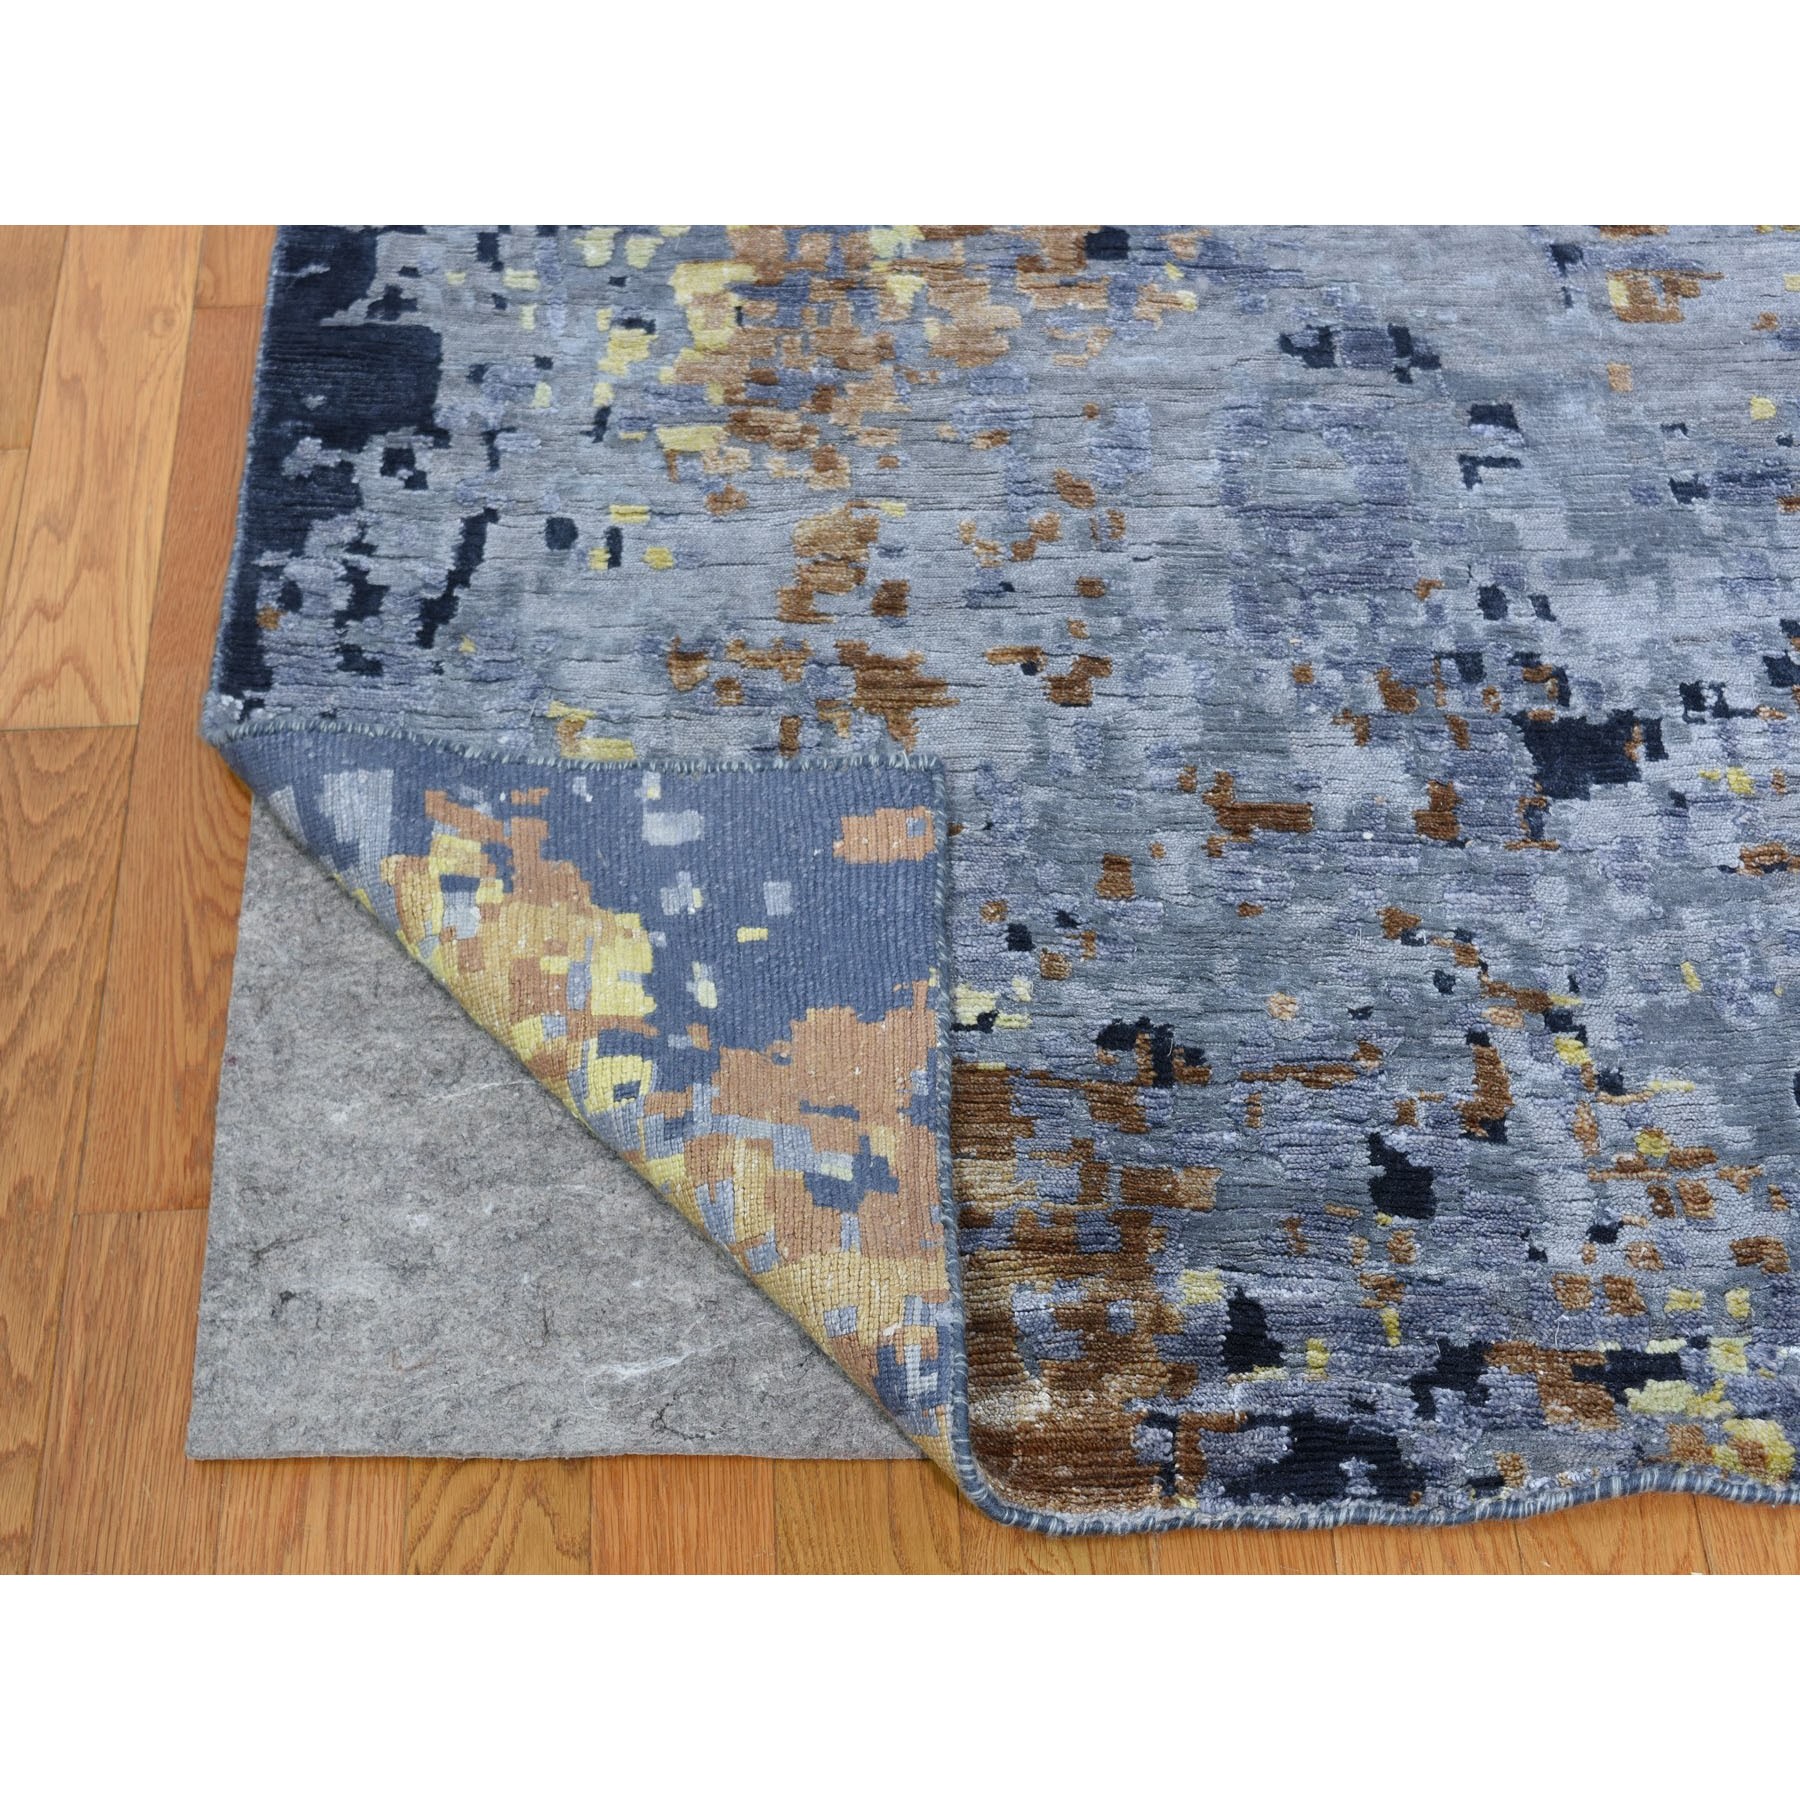 11-10 x14-9  Oversize Gray Abstract Design Wool and Silk Hi-Low Pile Hand Knotted Oriental Rug 